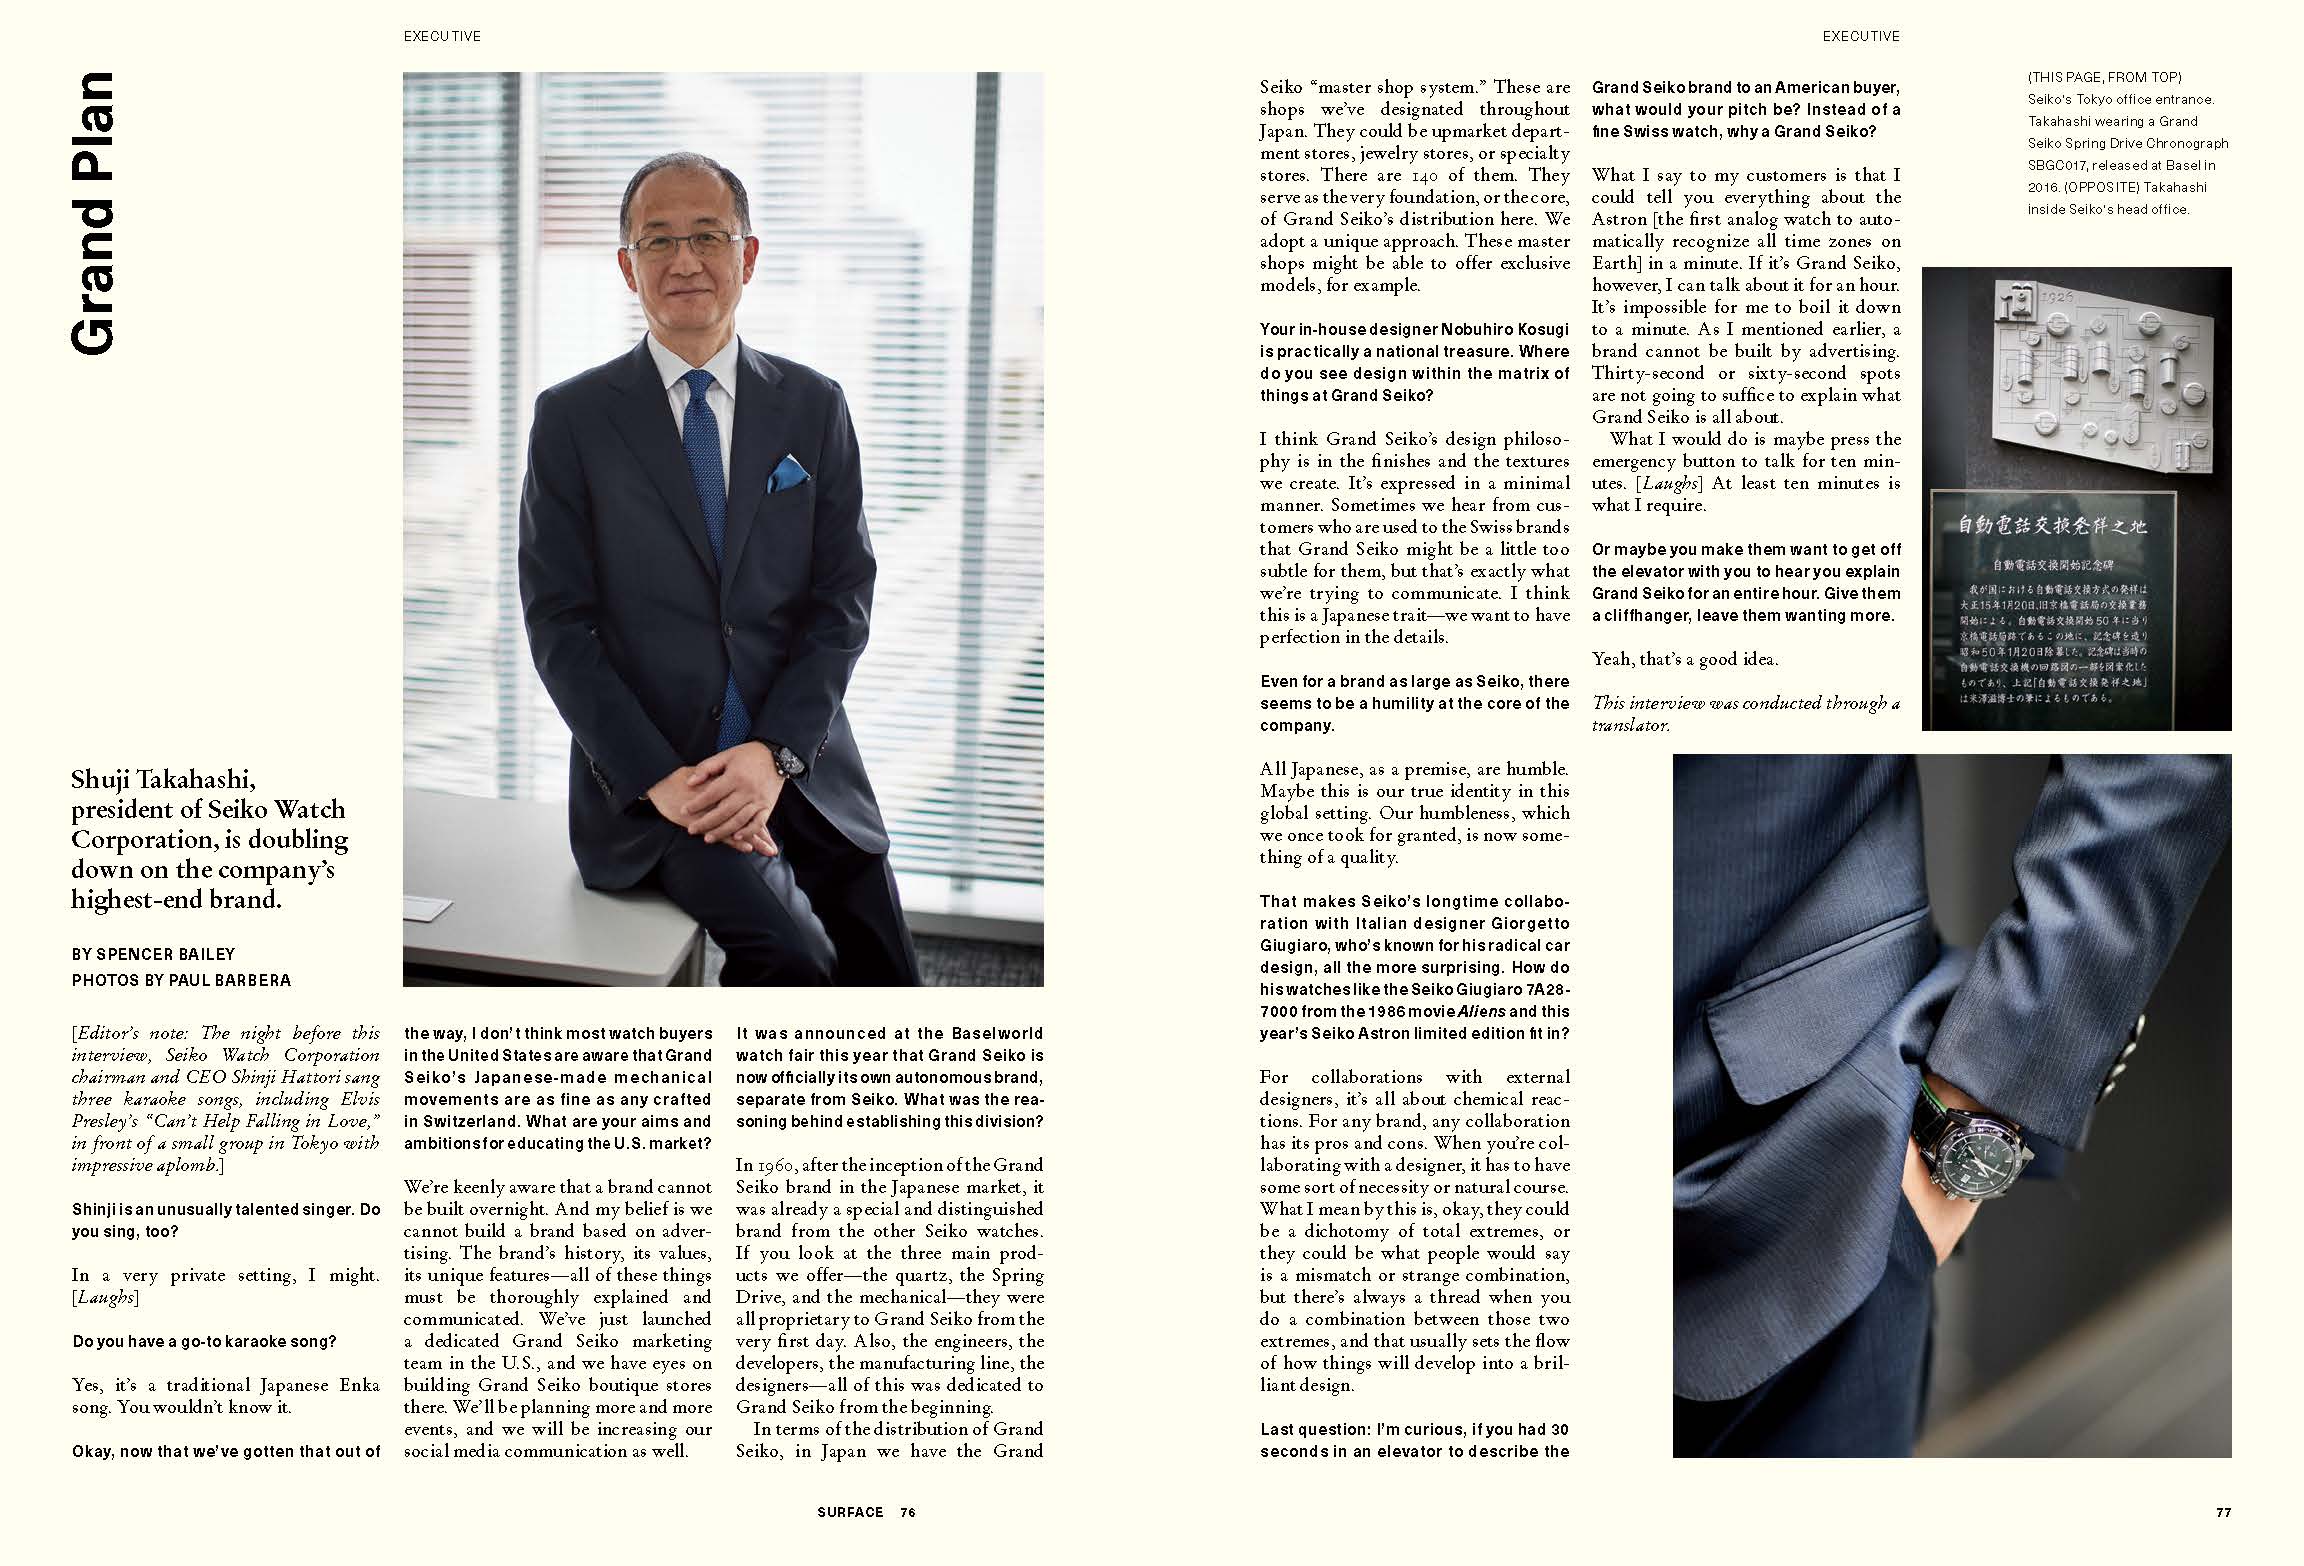 SURFACE_143_EXECUTIVE_Page_2